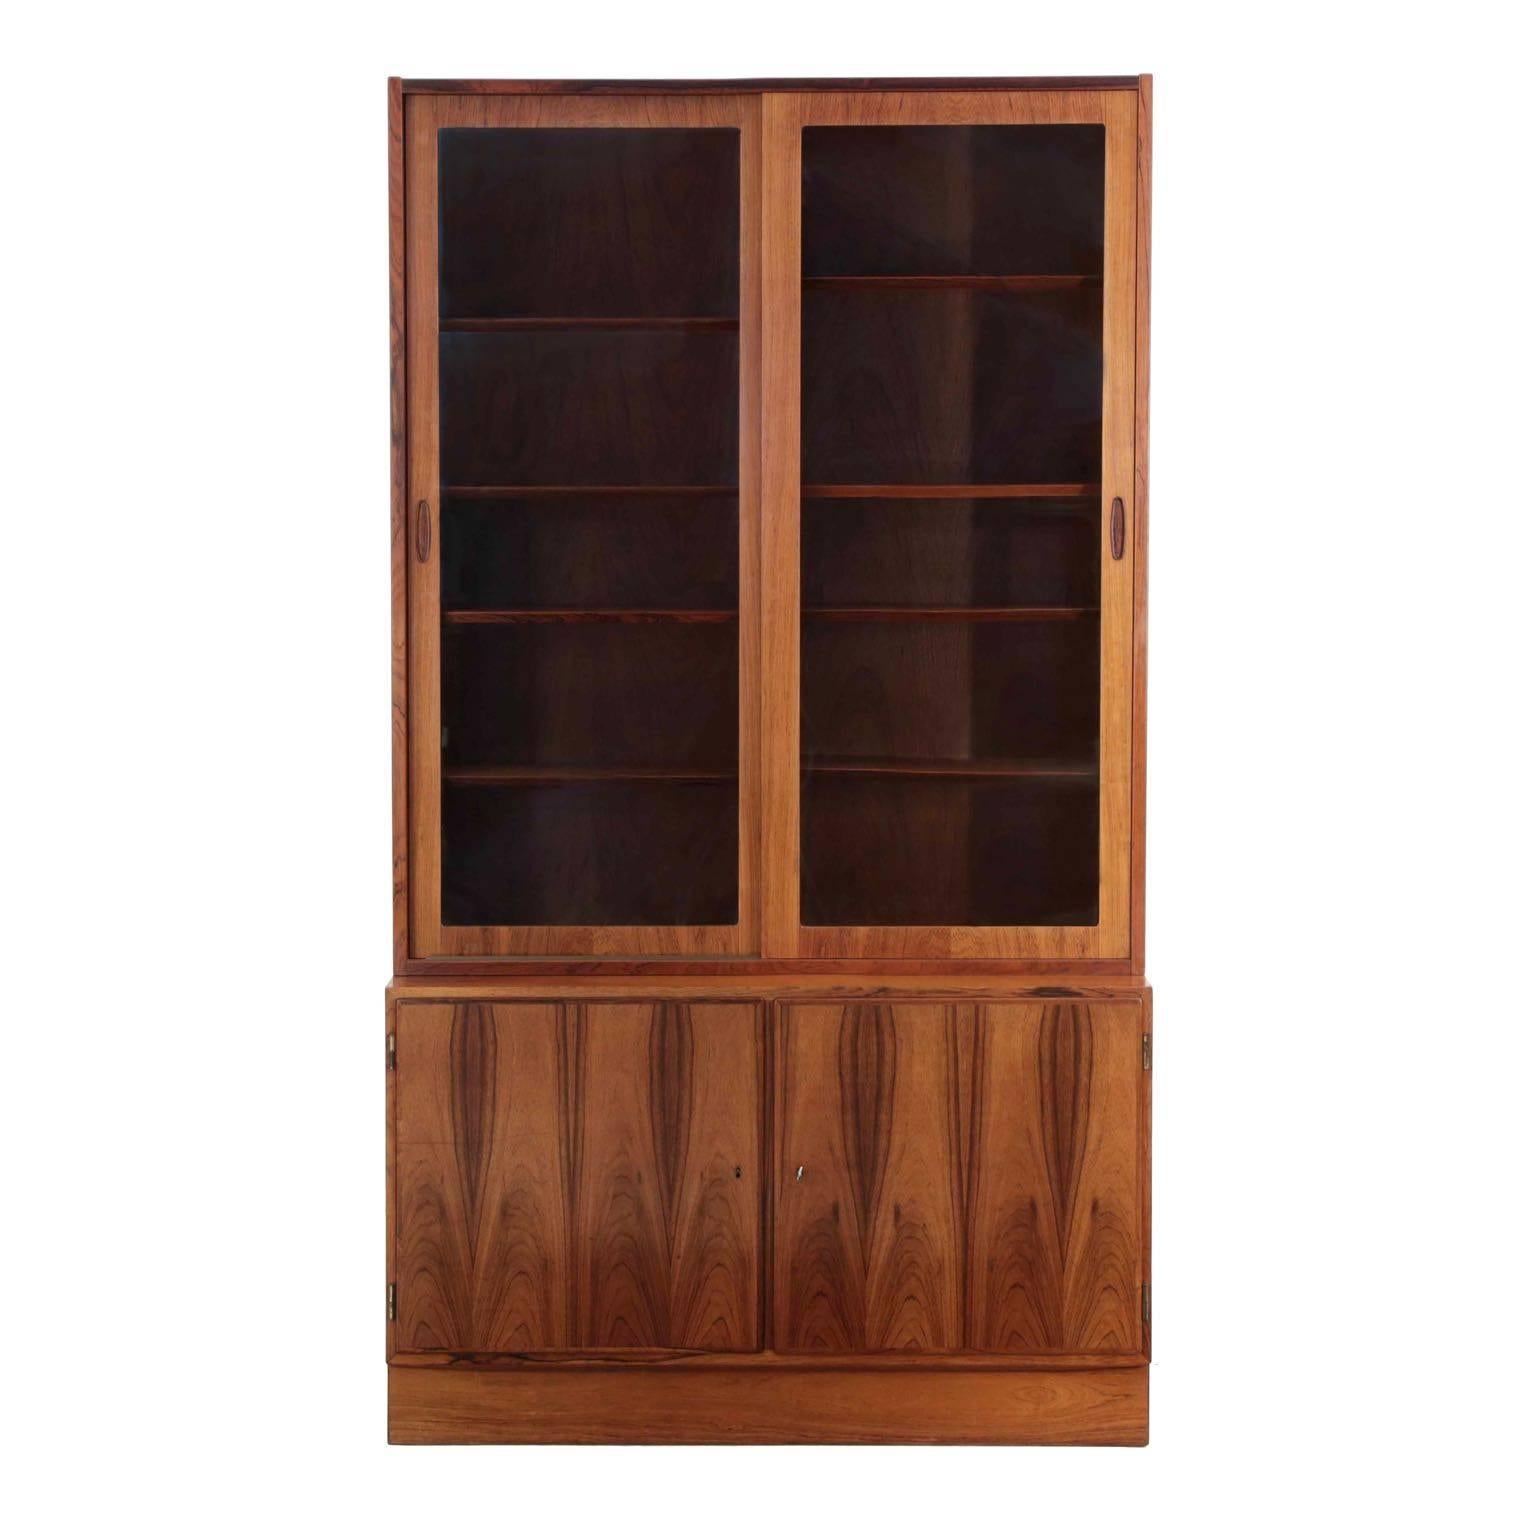 Danish Mid-Century Modern Rosewood Bookcase Cabinet by Poul Hundevad